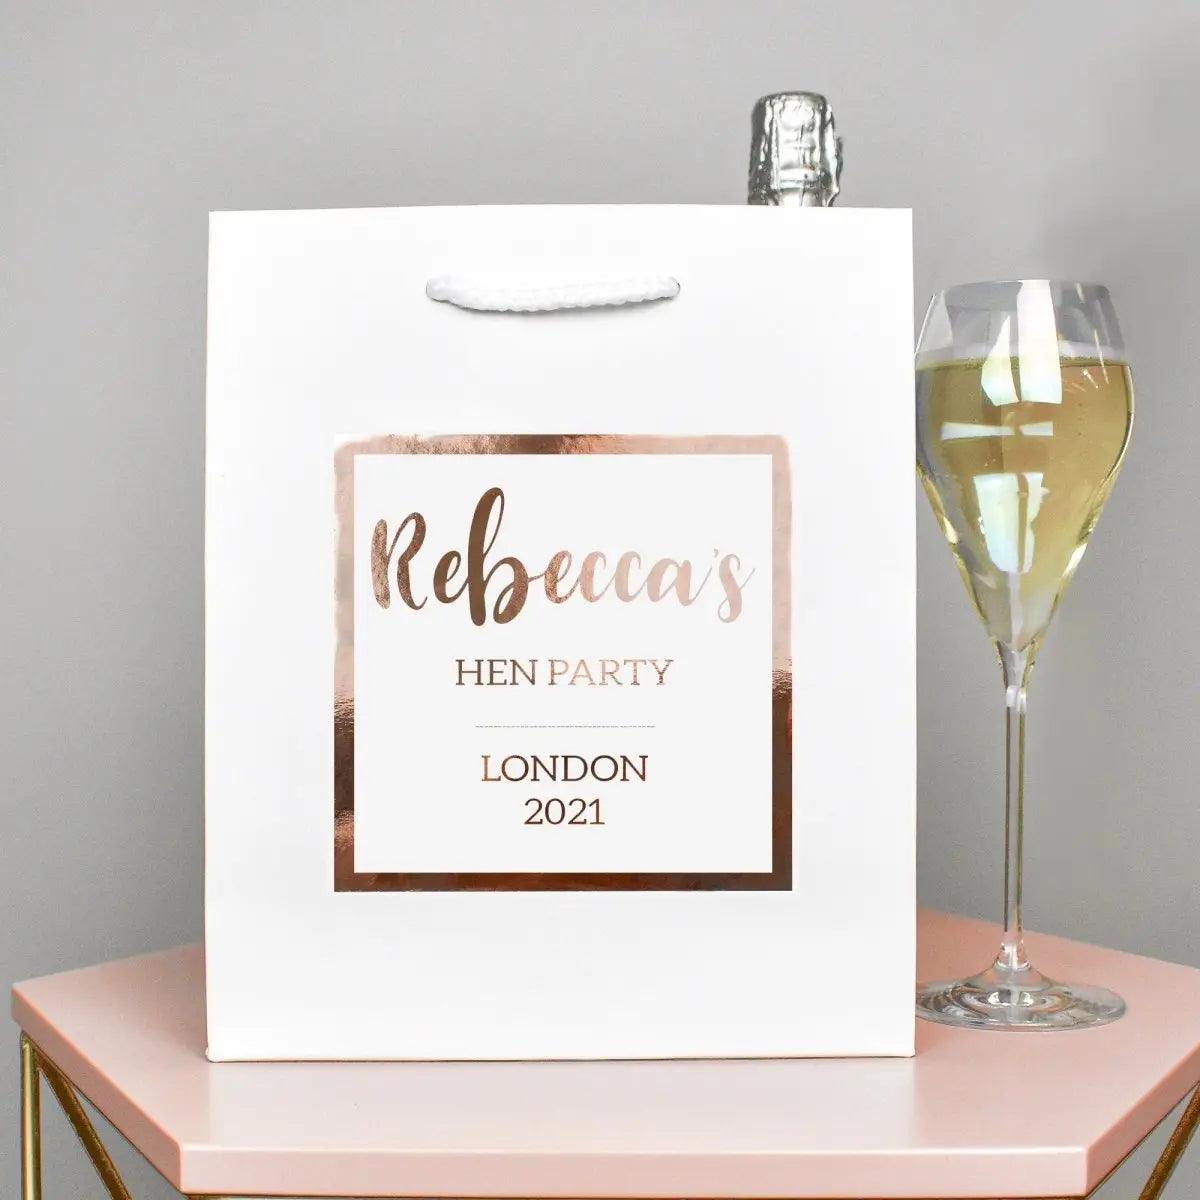 Rose Pink Personalised Gift Bag, DIY Personalised Party Bag, Favour Bag, Gold Party Bags and Gifts, Gift Wrapping, Gift Bags, Hen Party Bag - Amy Lucy